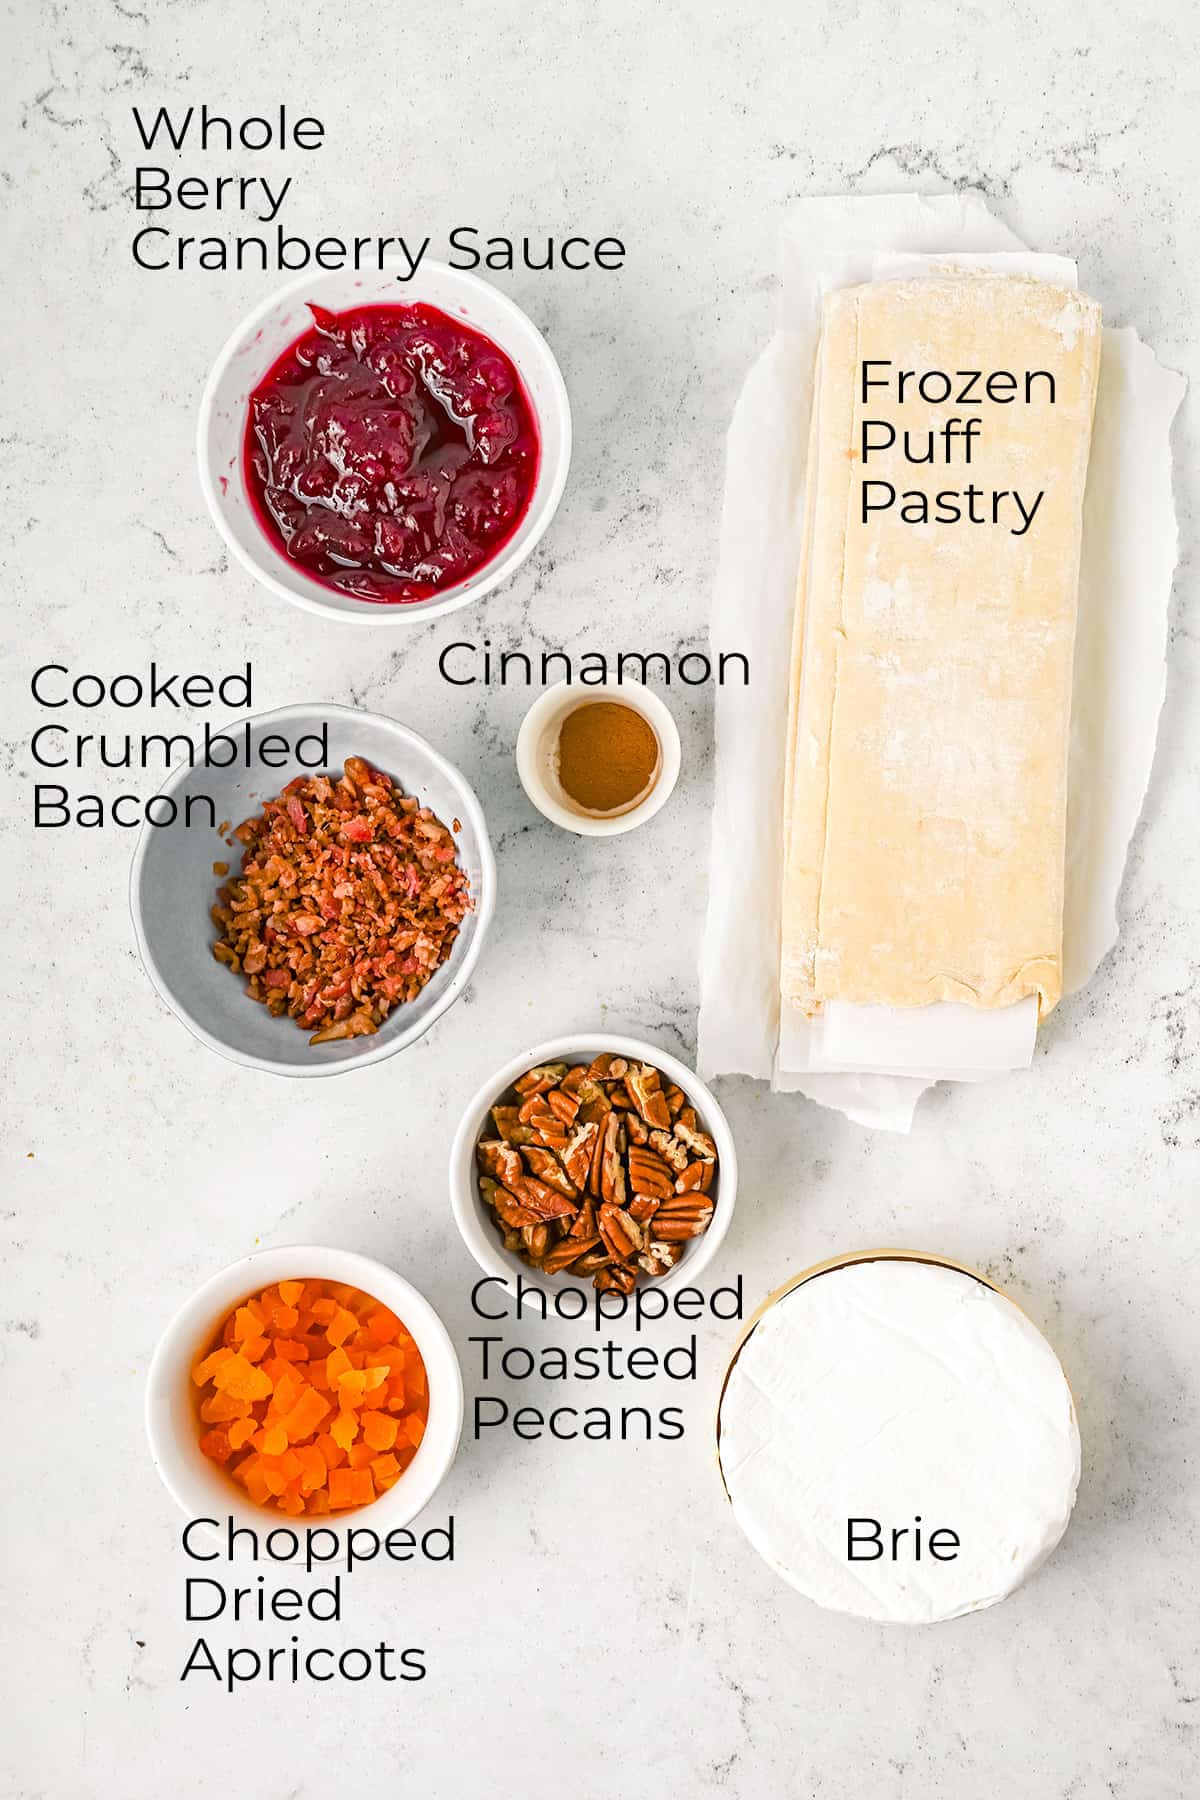 Photo of ingredients needed to make the recipe.